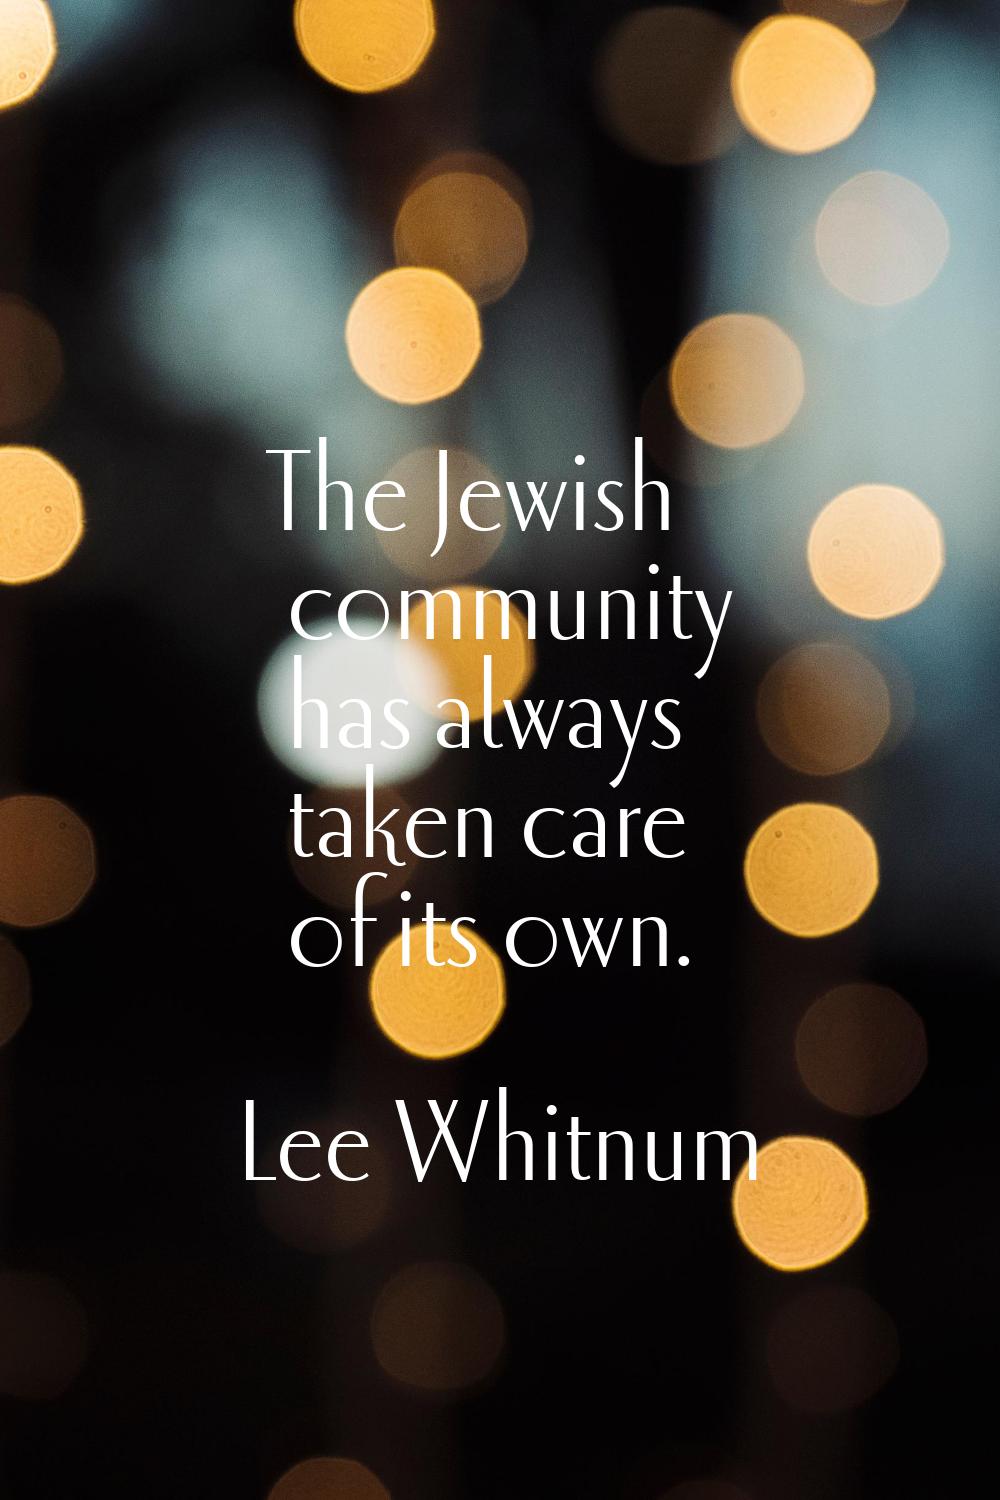 The Jewish community has always taken care of its own.